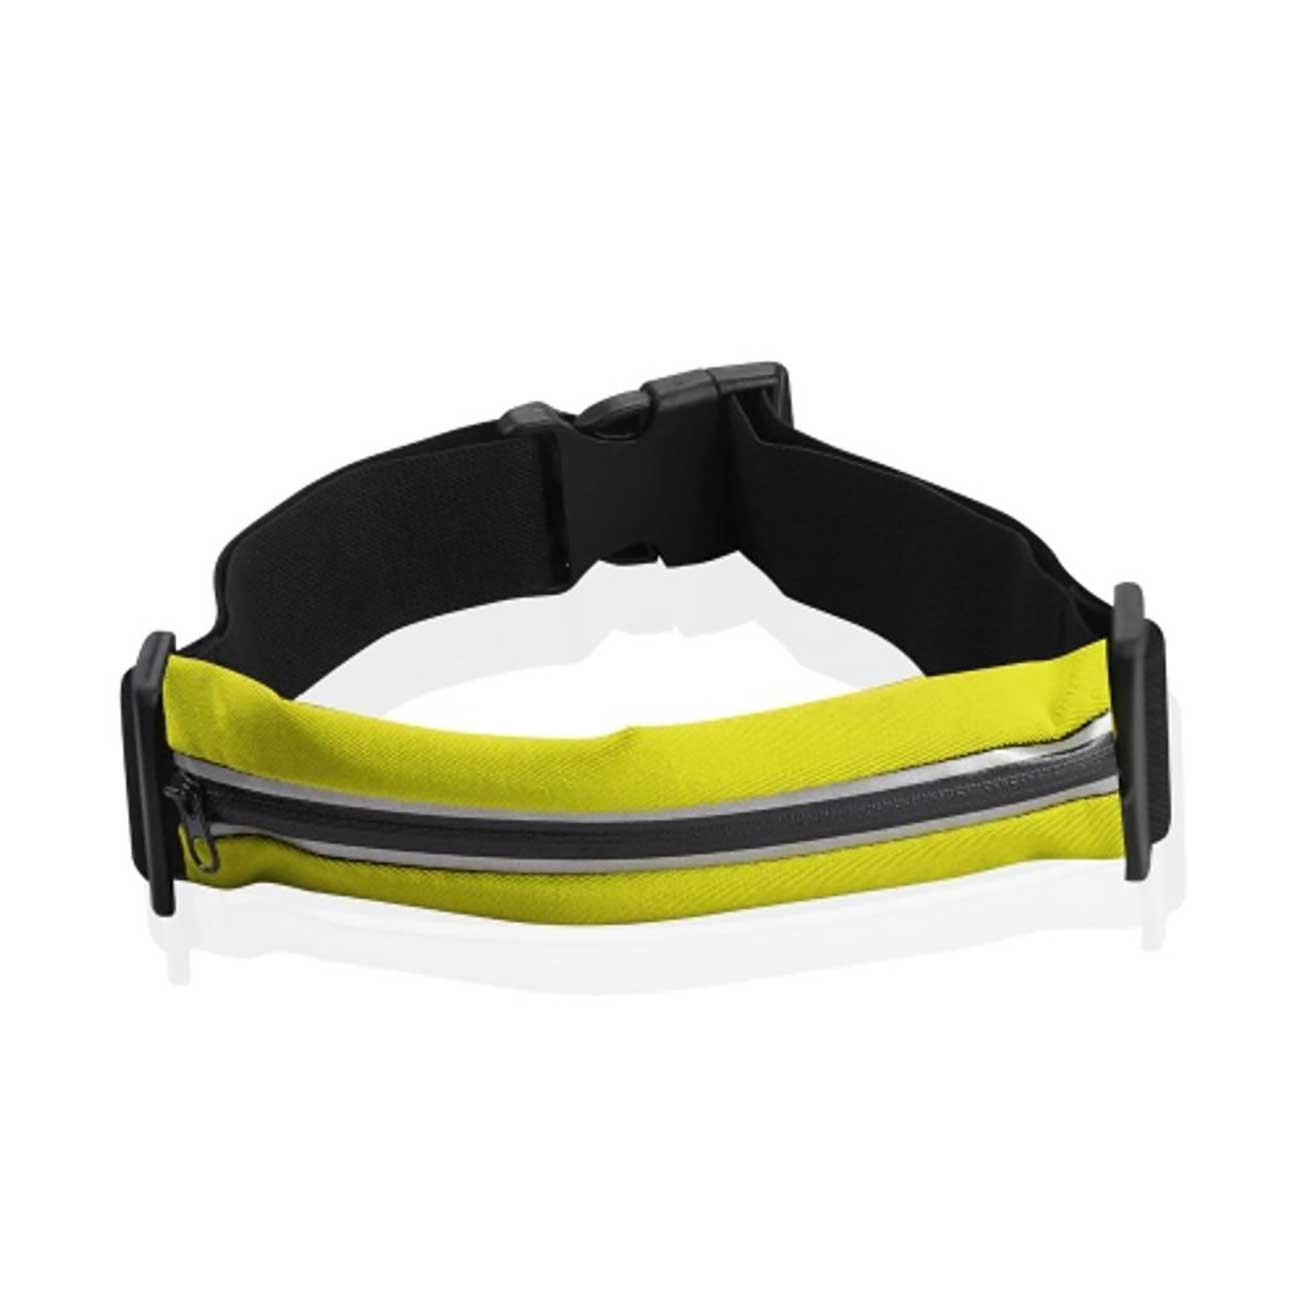 REIKO SPORTS STRETCH HIP WAIST PACK 7.87X1.77X1.77 INCHES INCHES IN YELLOW